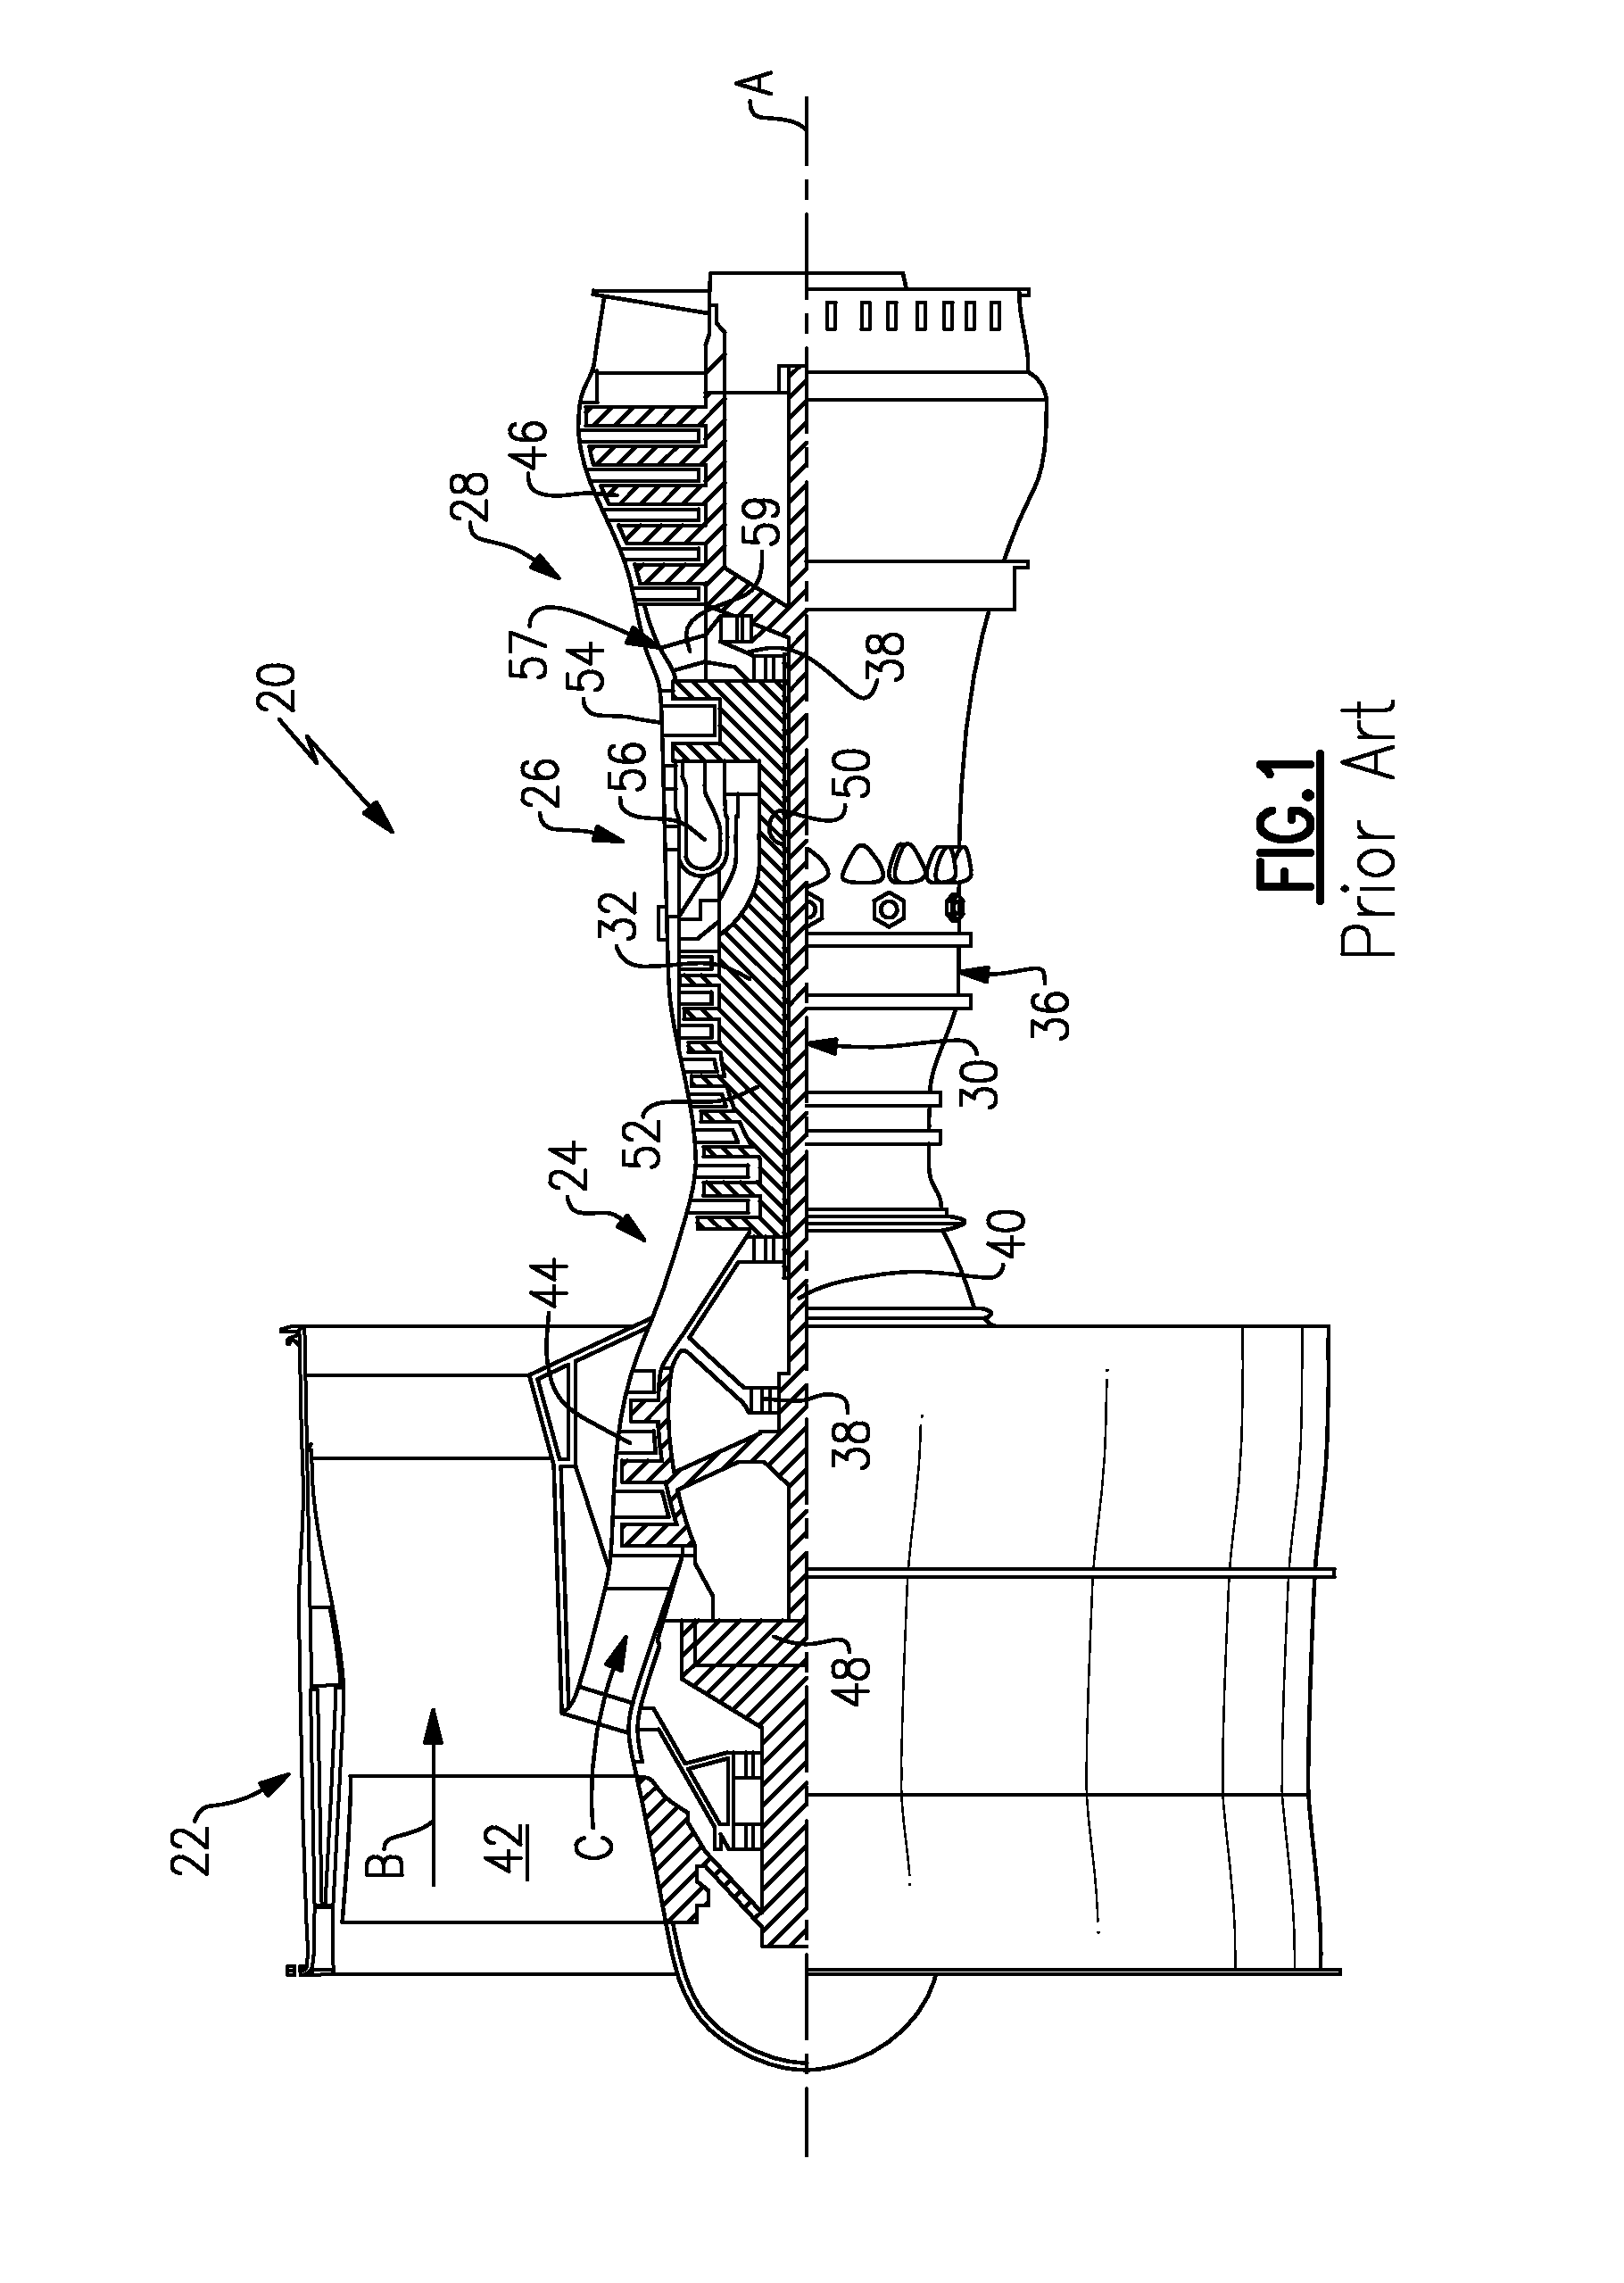 Anti-icing core inlet stator assembly for a gas turbine engine